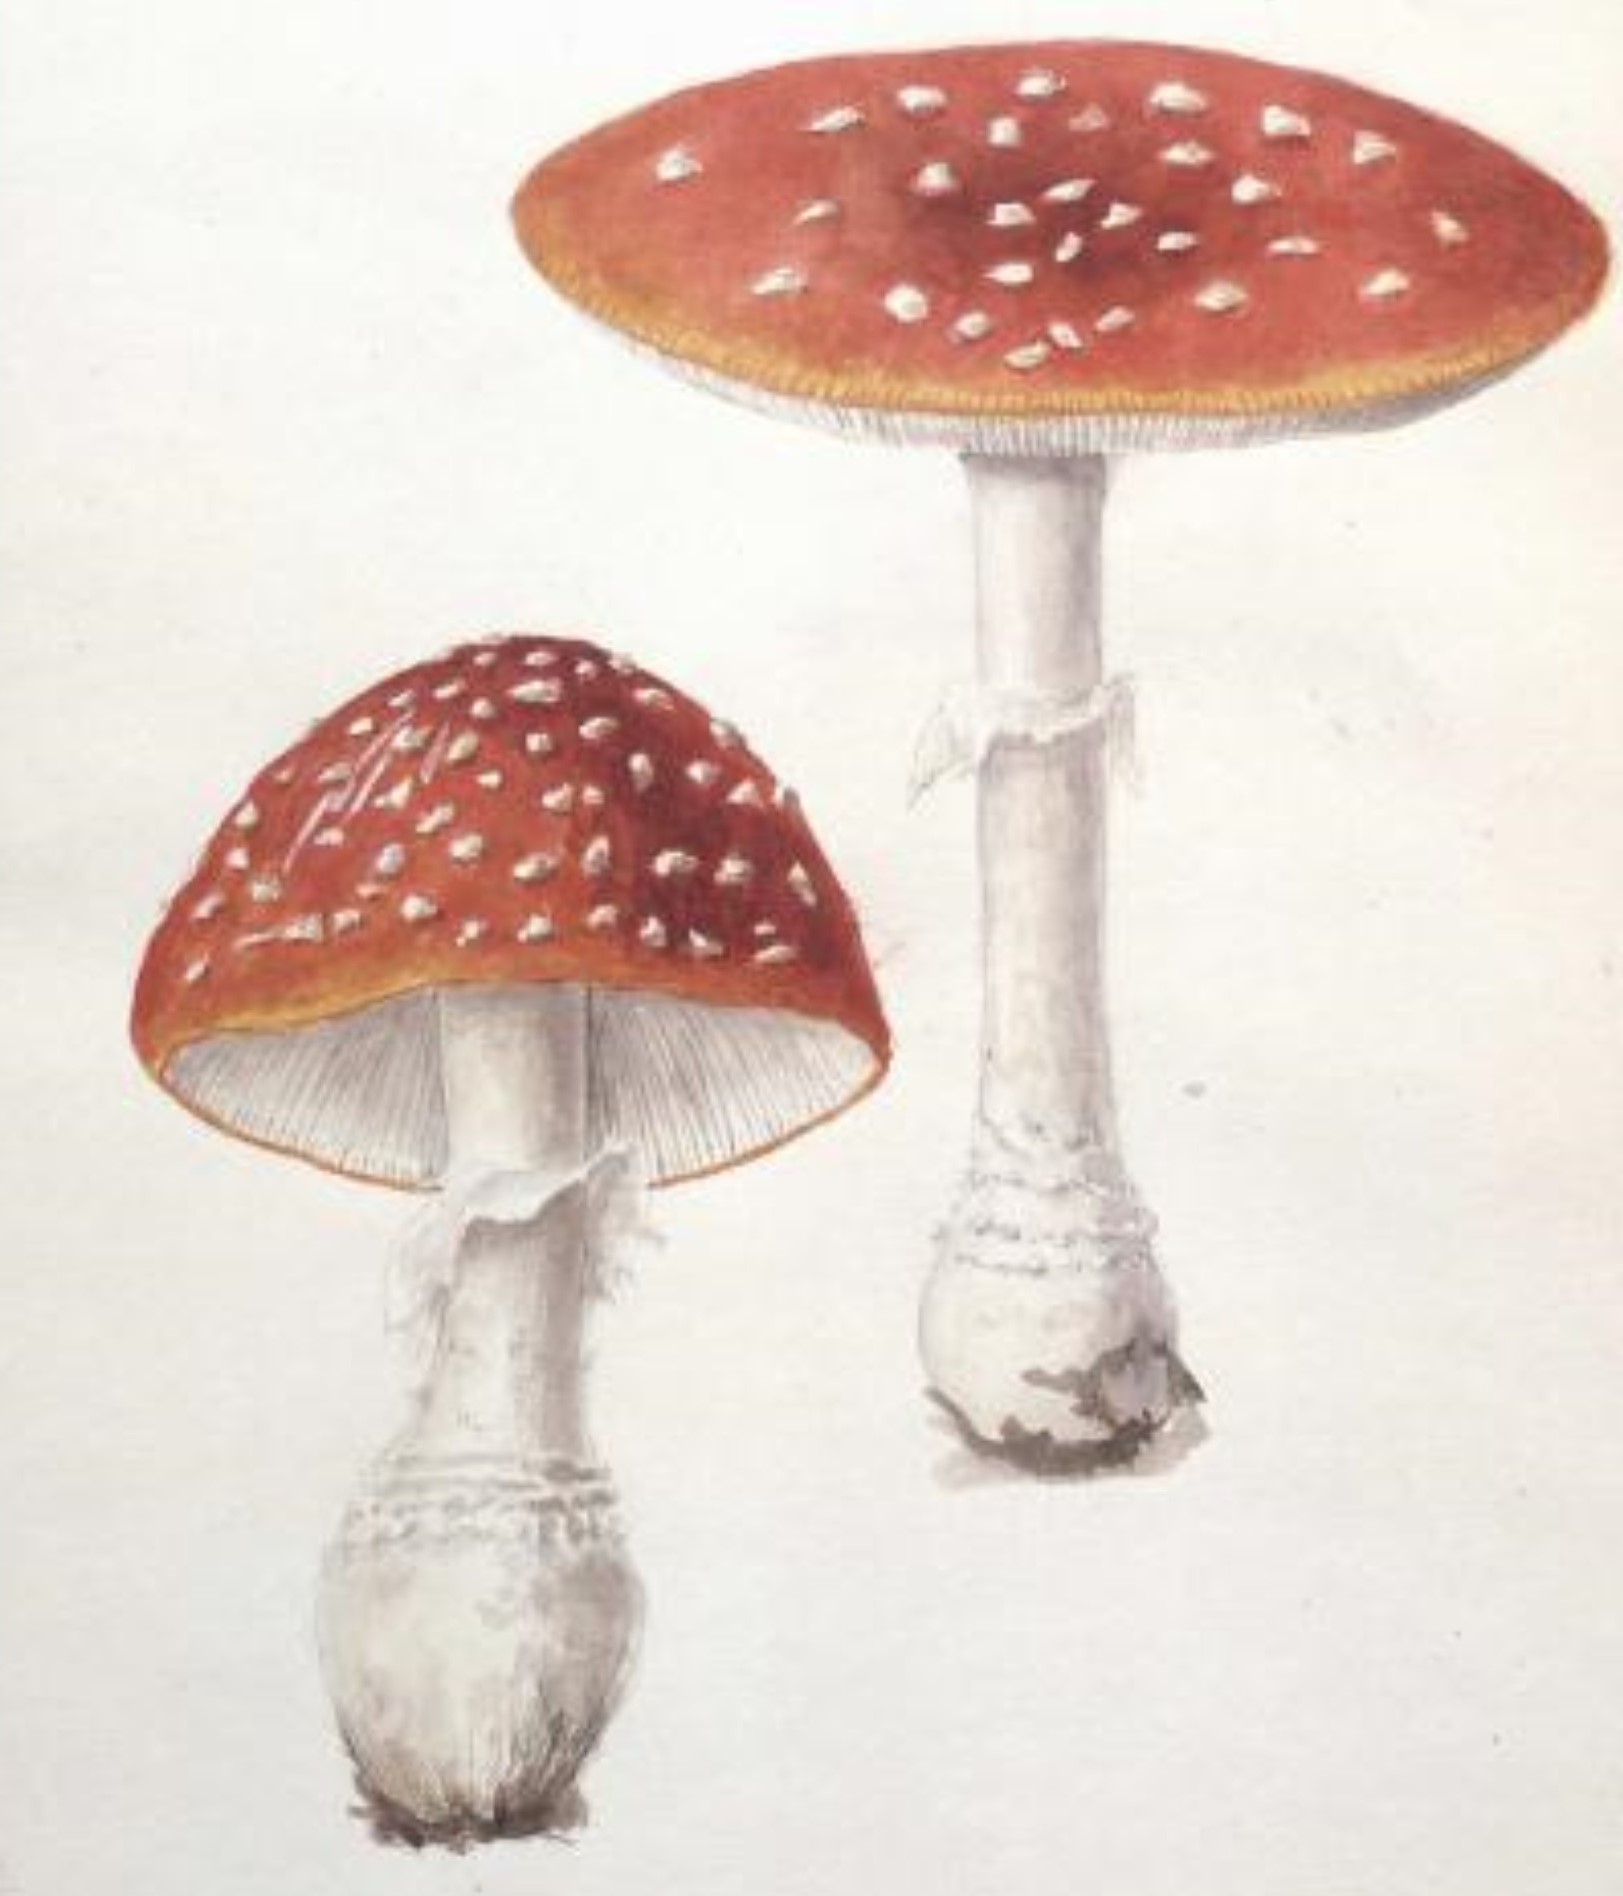 Watercolour illustrations of fly agaric (Amanita muscarias) by Elsie Wakefield. The toadstool is bright red with white spots.